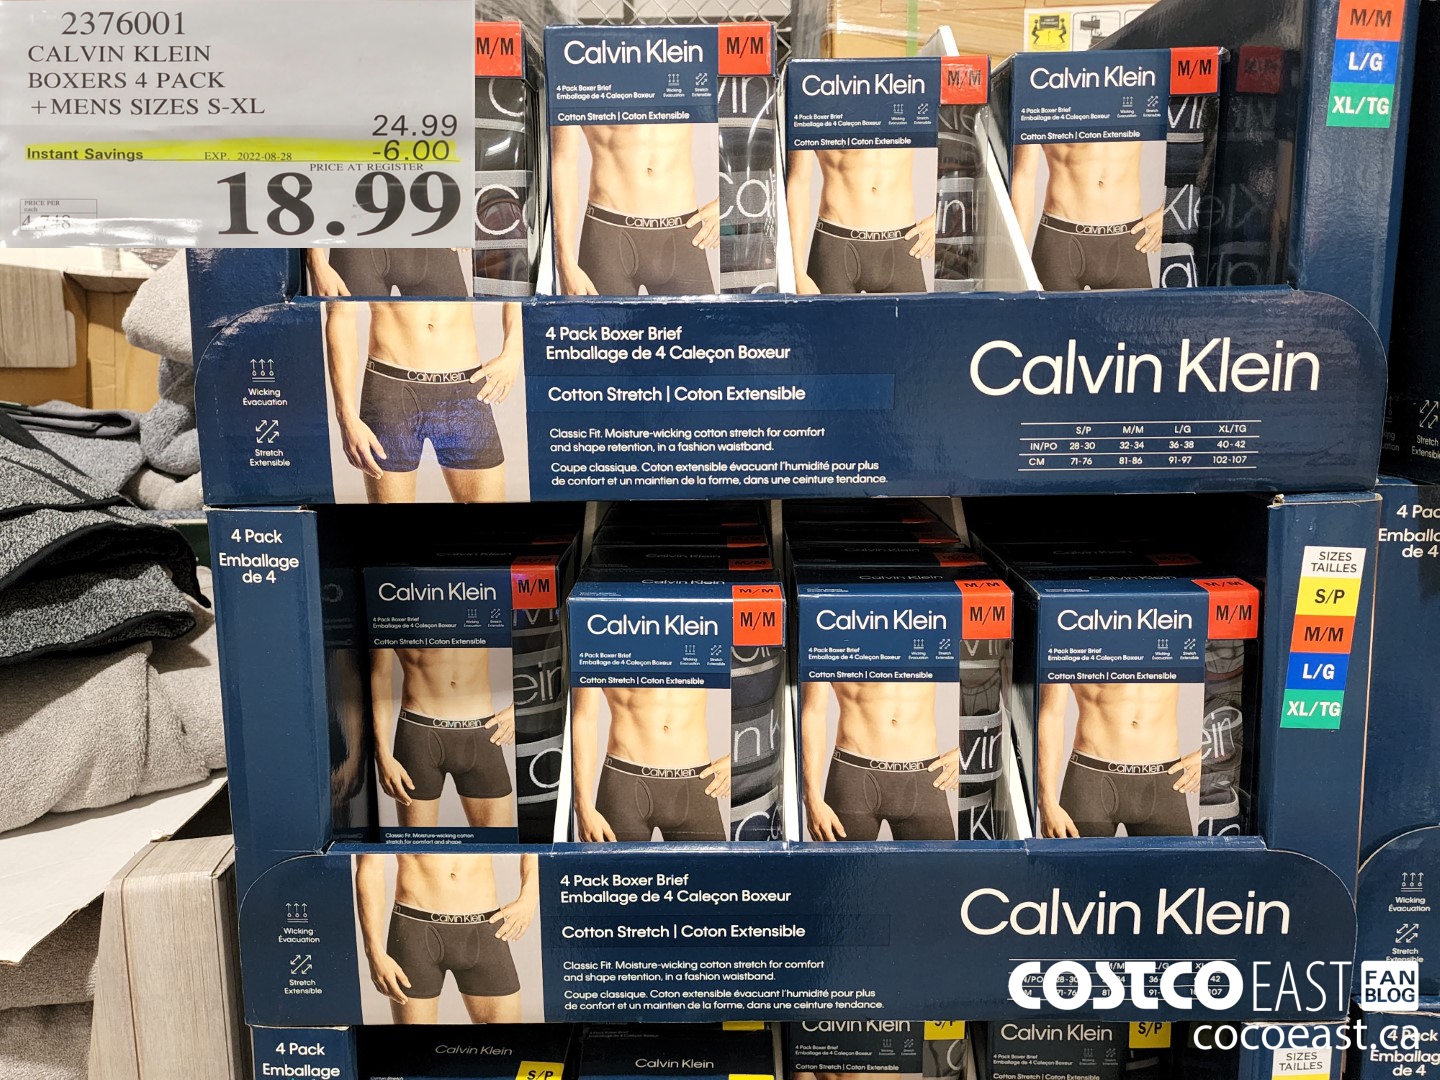 2376001 CALVIN KLEIN BOXERS 4 PACK MENS SIZES S XL 6 00 INSTANT SAVINGS  EXPIRES ON 2022 08 28 18 99 - Costco East Fan Blog